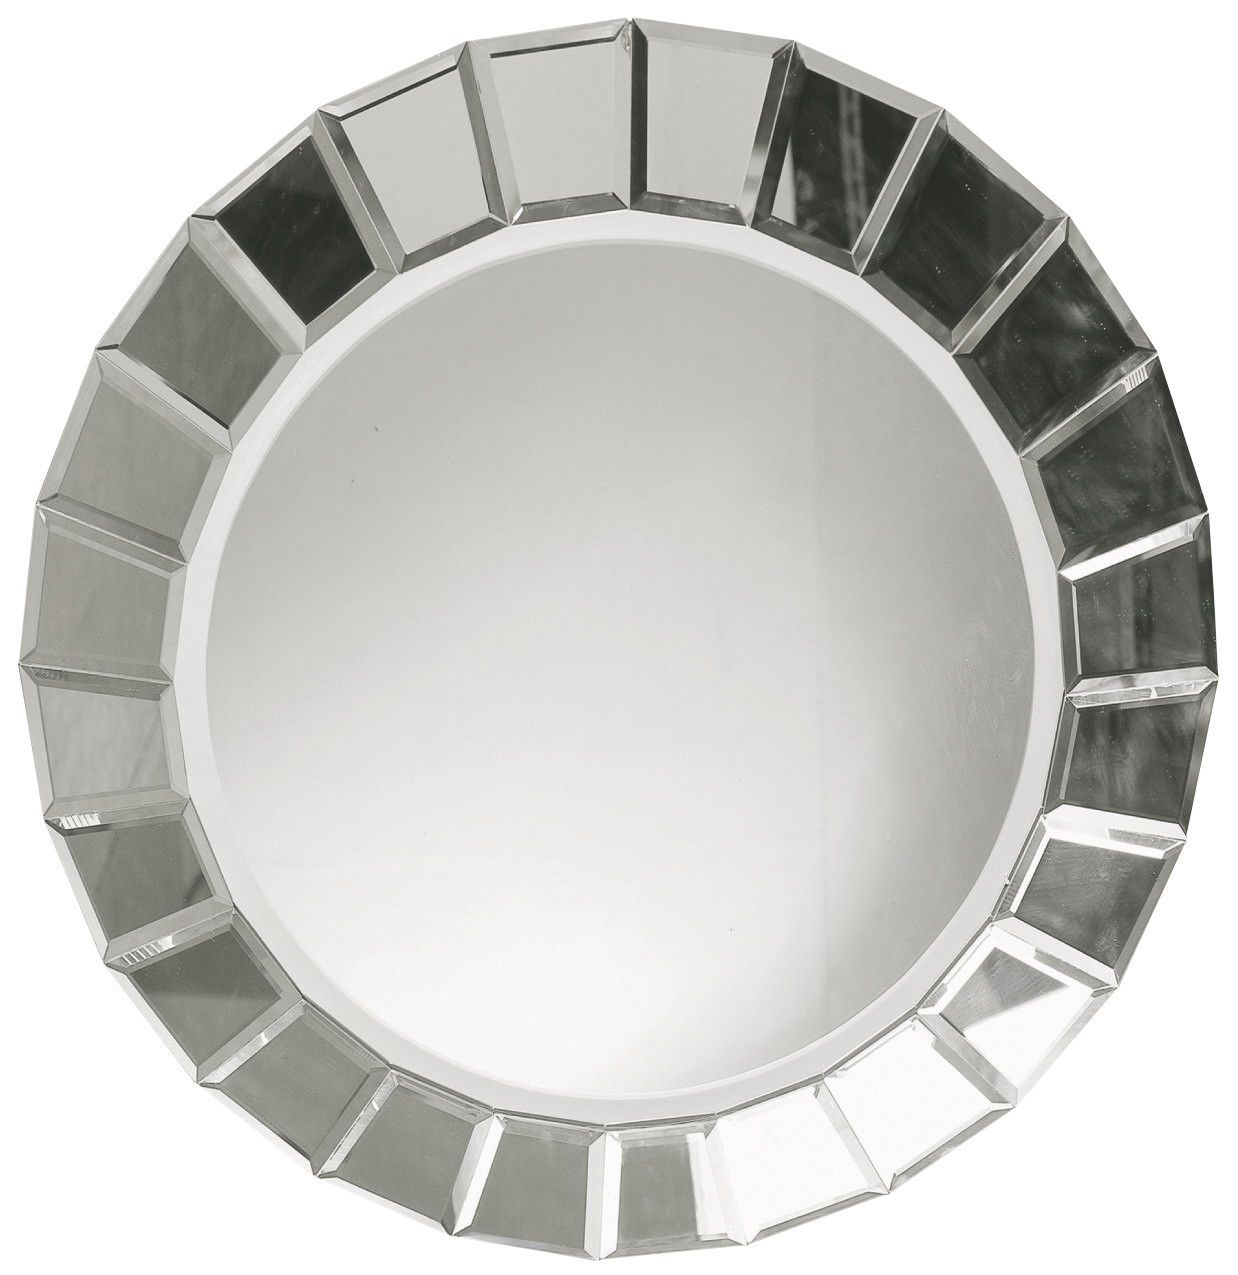 23 Fancy Decorative Mirror Designs Throughout Shildon Beveled Accent Mirrors (View 13 of 15)